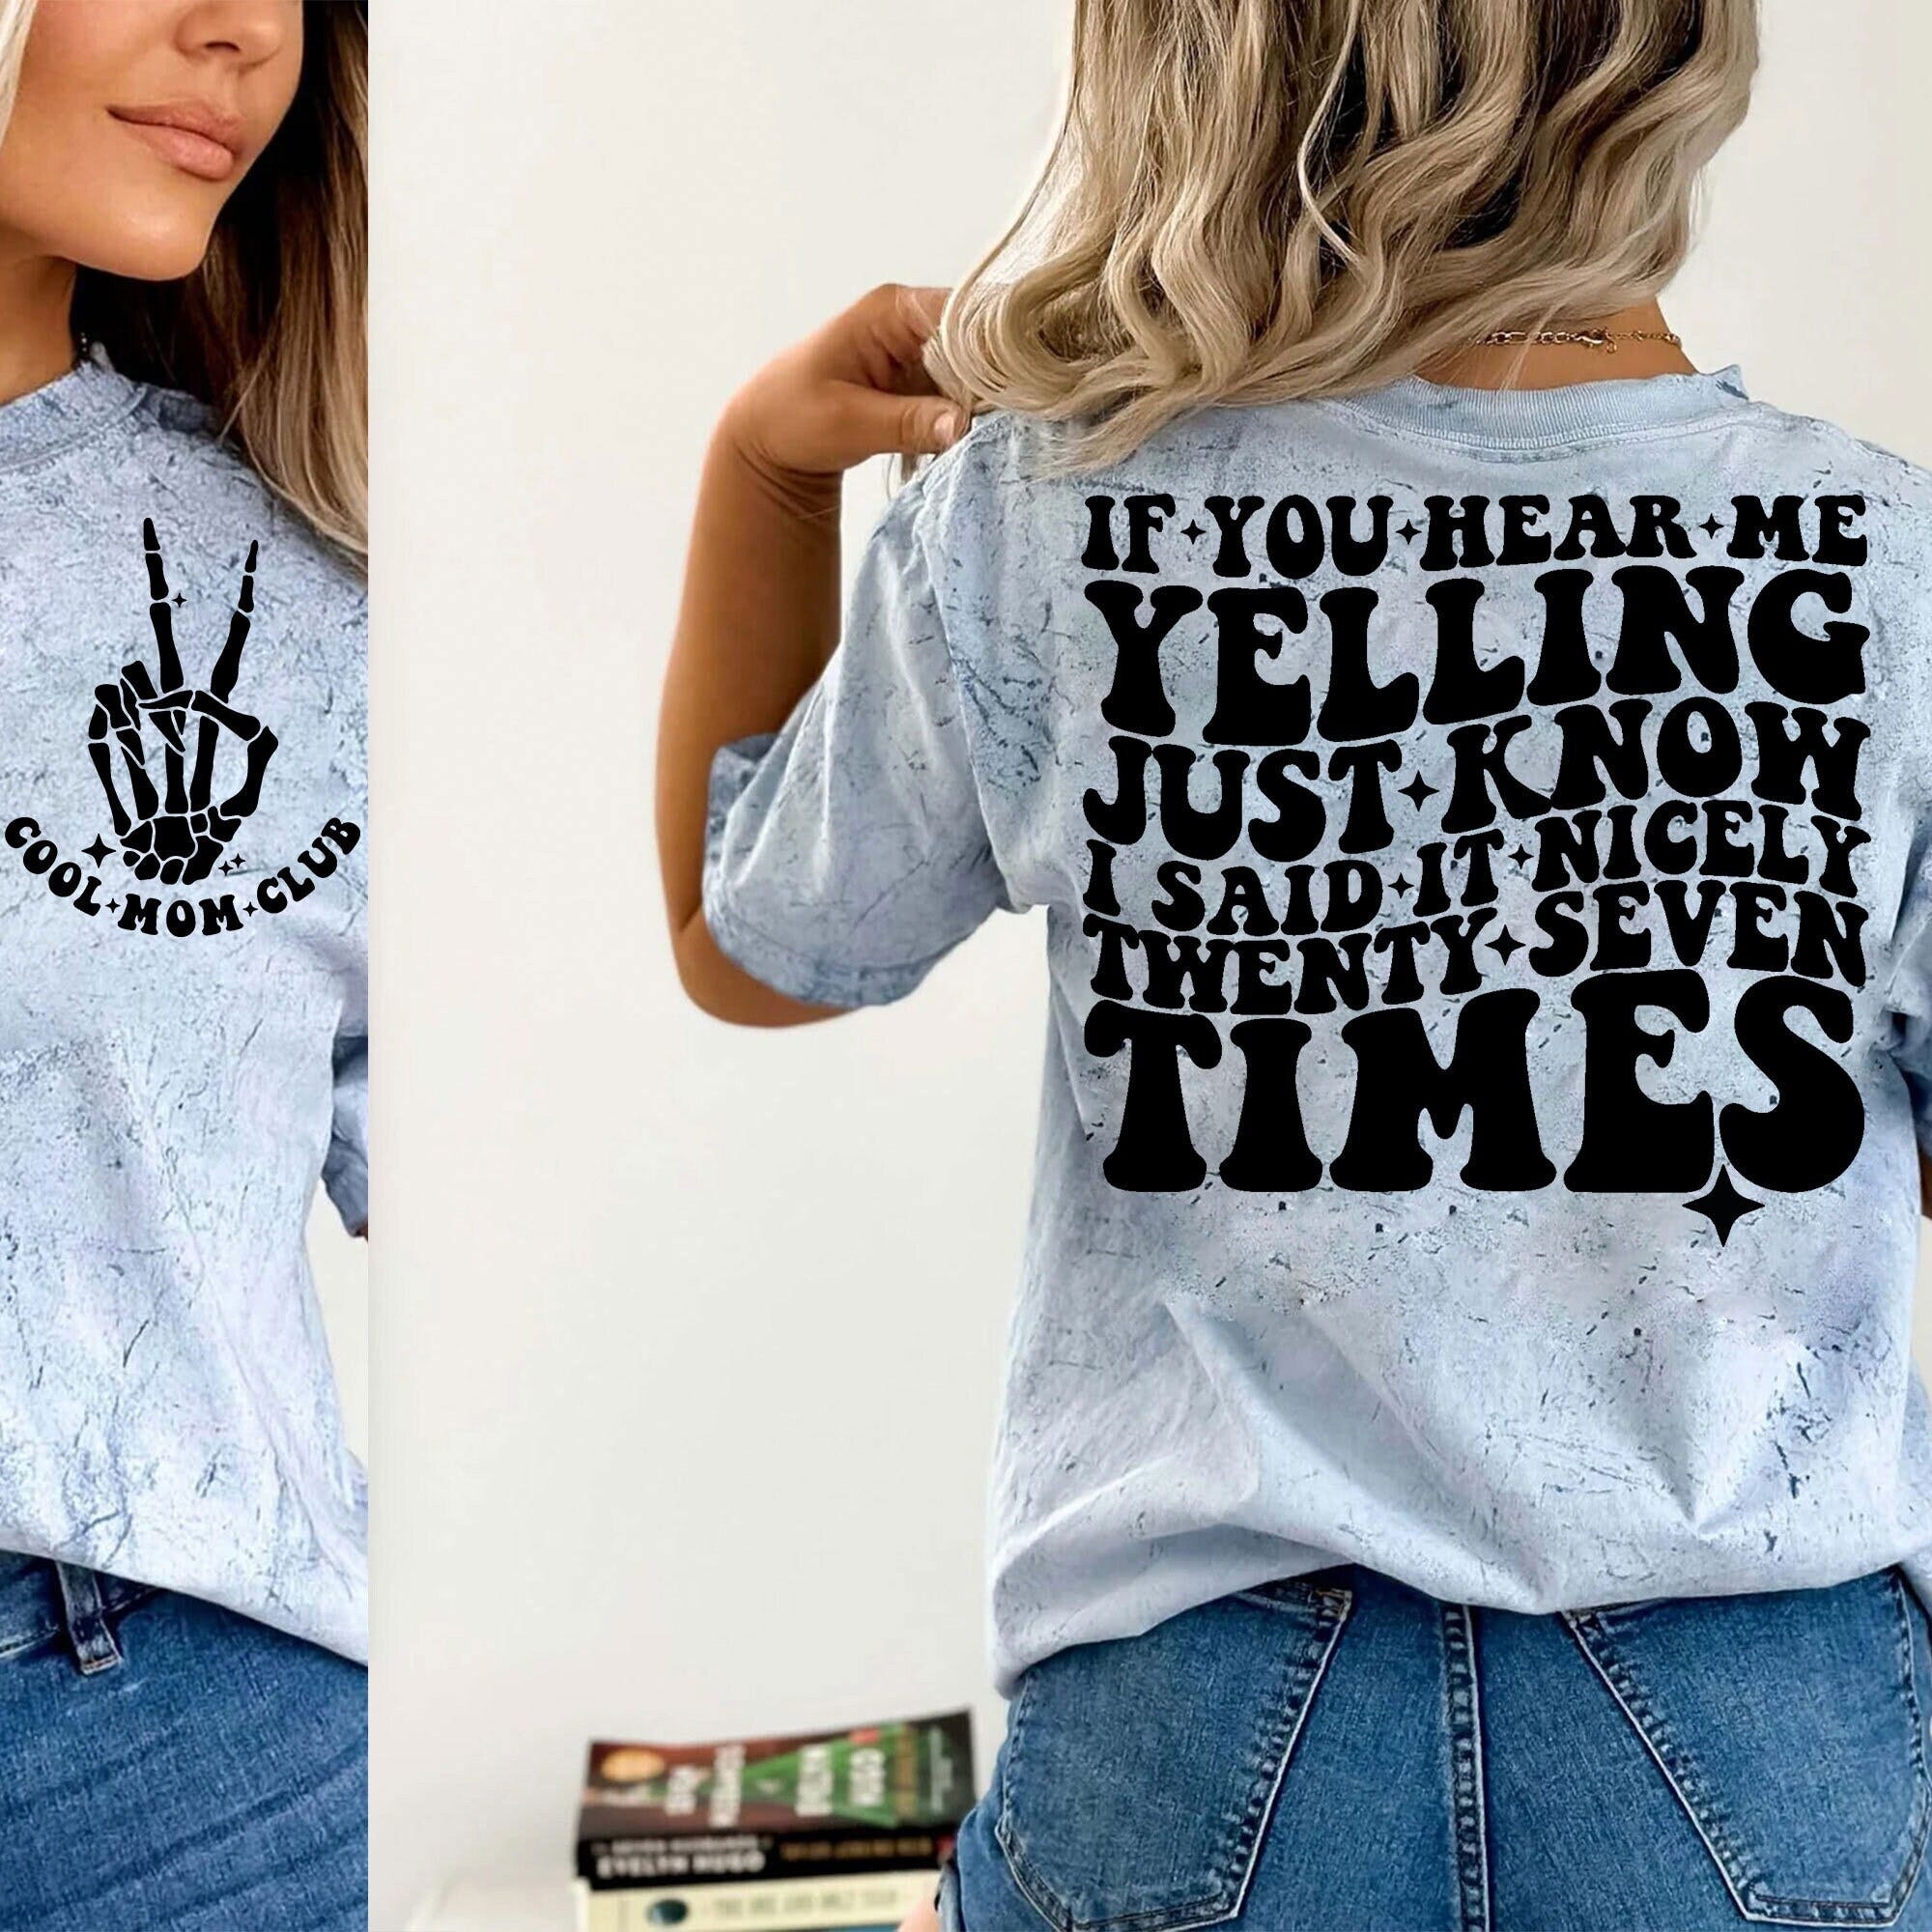 If You Hear Me Yelling Just Know That I Said It Nicely Twenty Seven Times Png Svg, Mom Life Svg, Mama Svg, Funny Mom Png Retro Mom Shirt Svg